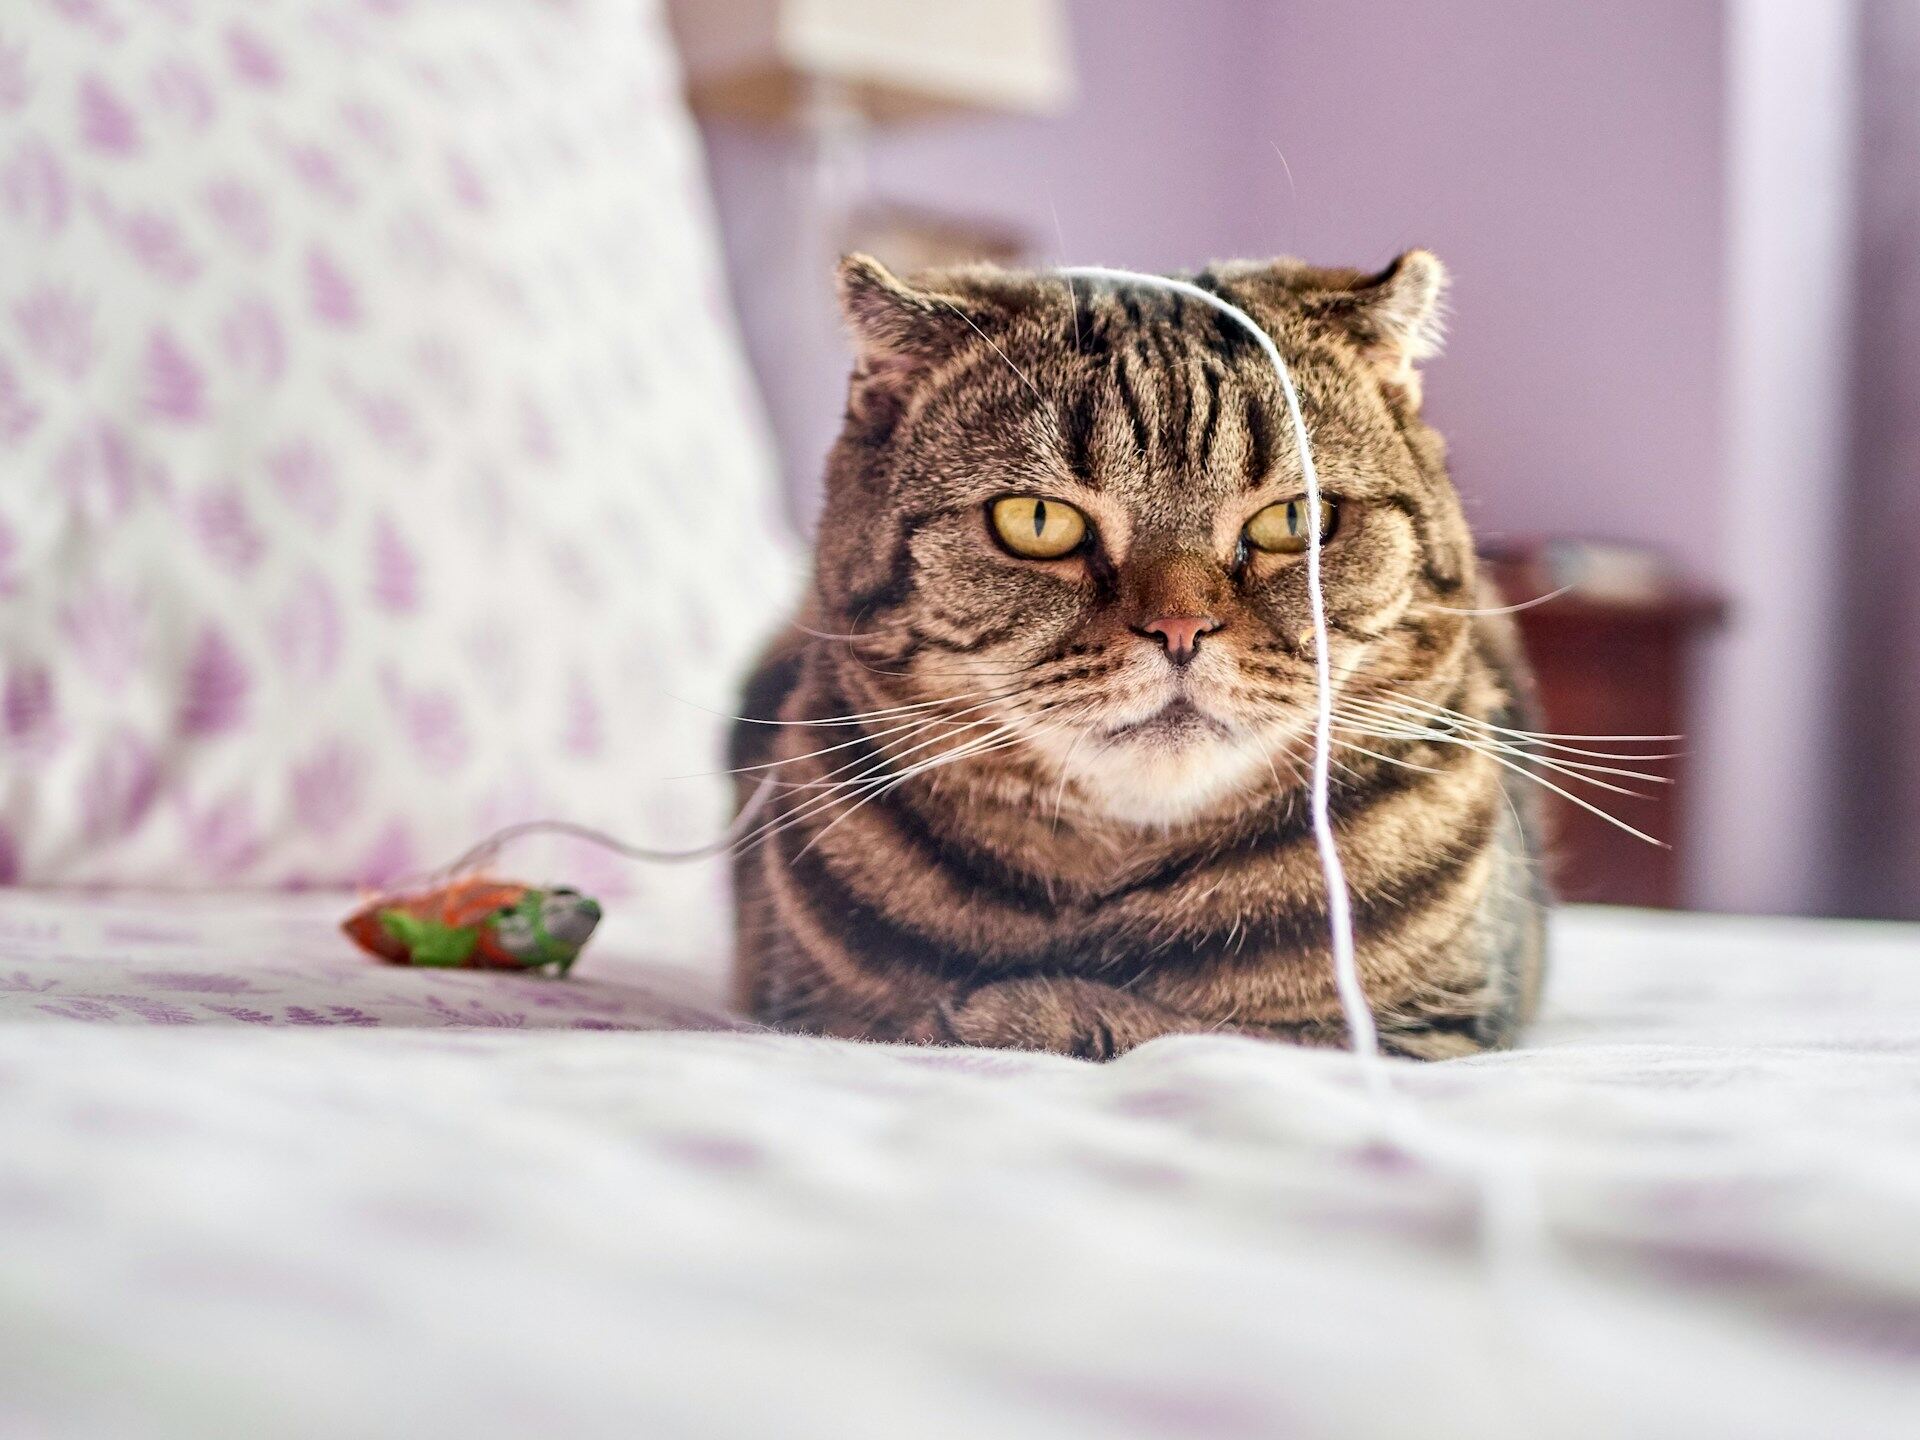 A cat sitting with a string toy on its head